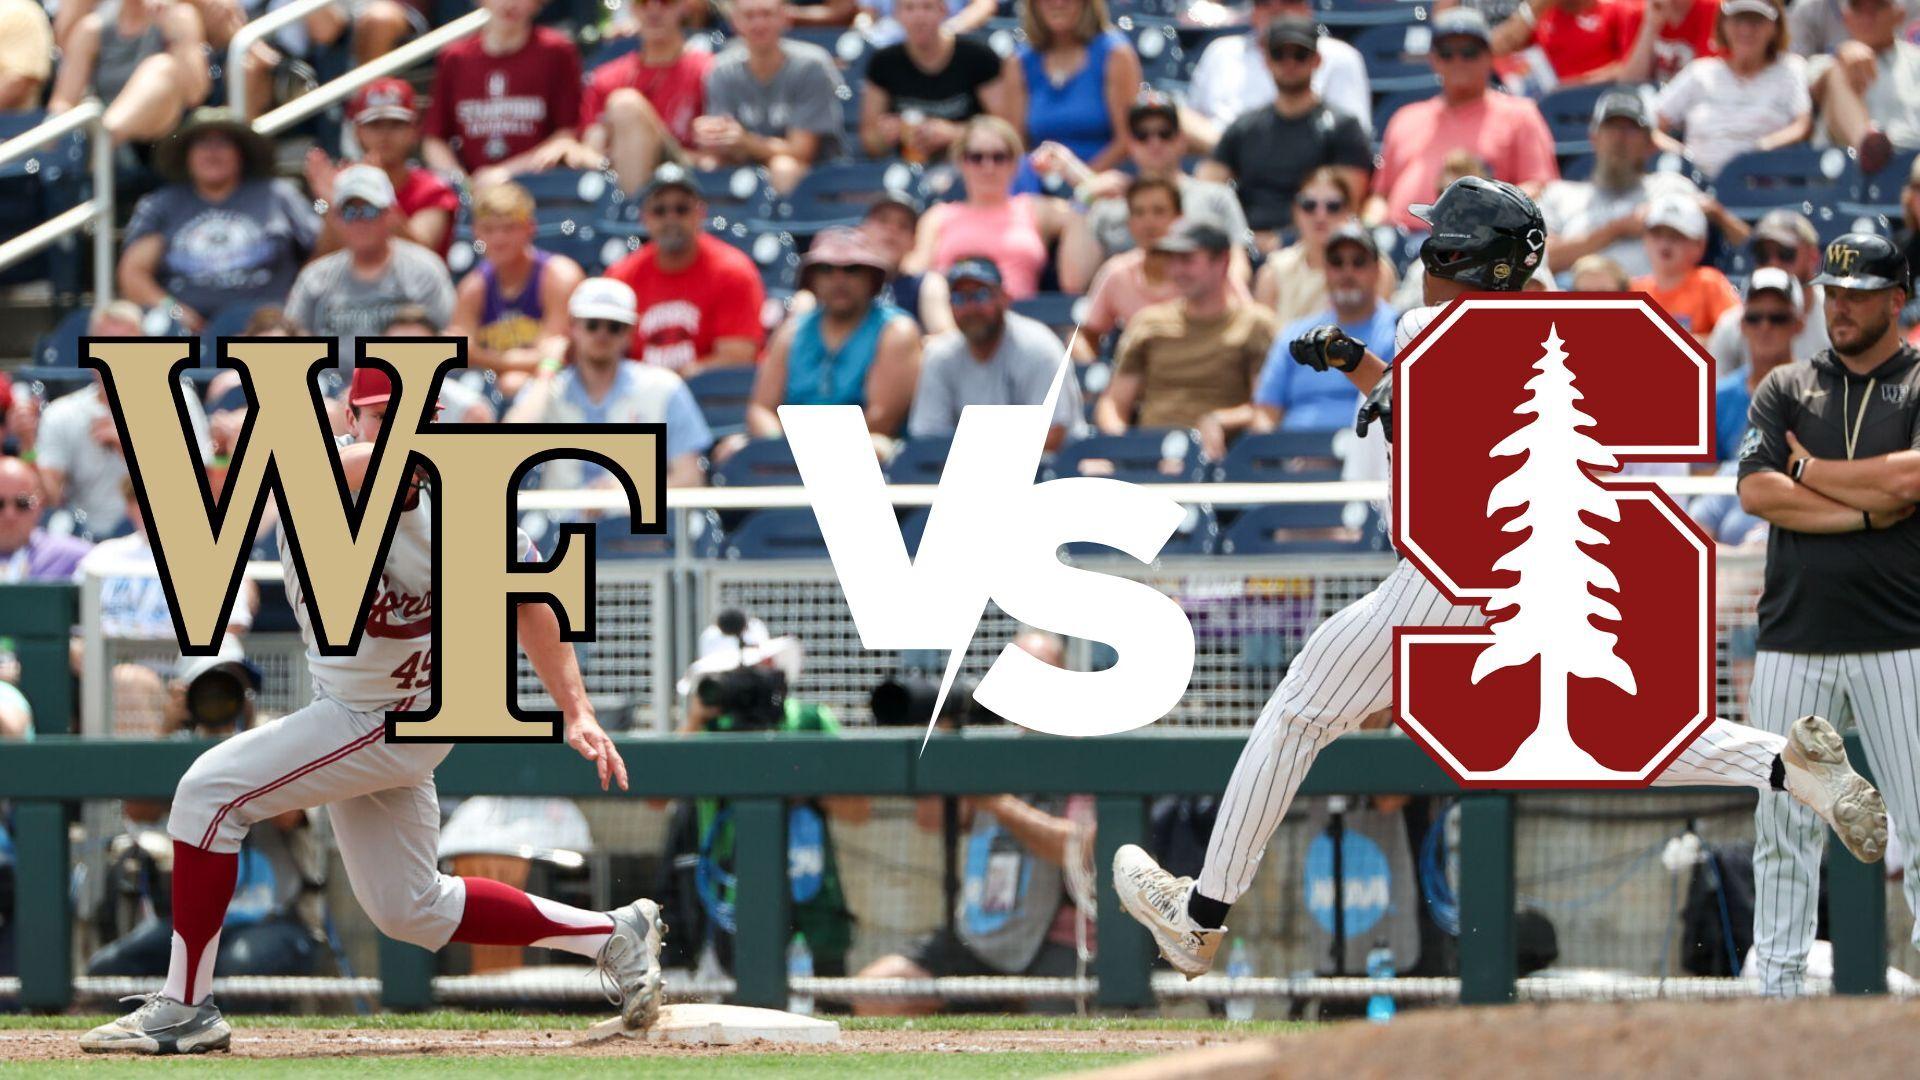 For Stanford, College World Series is old hat